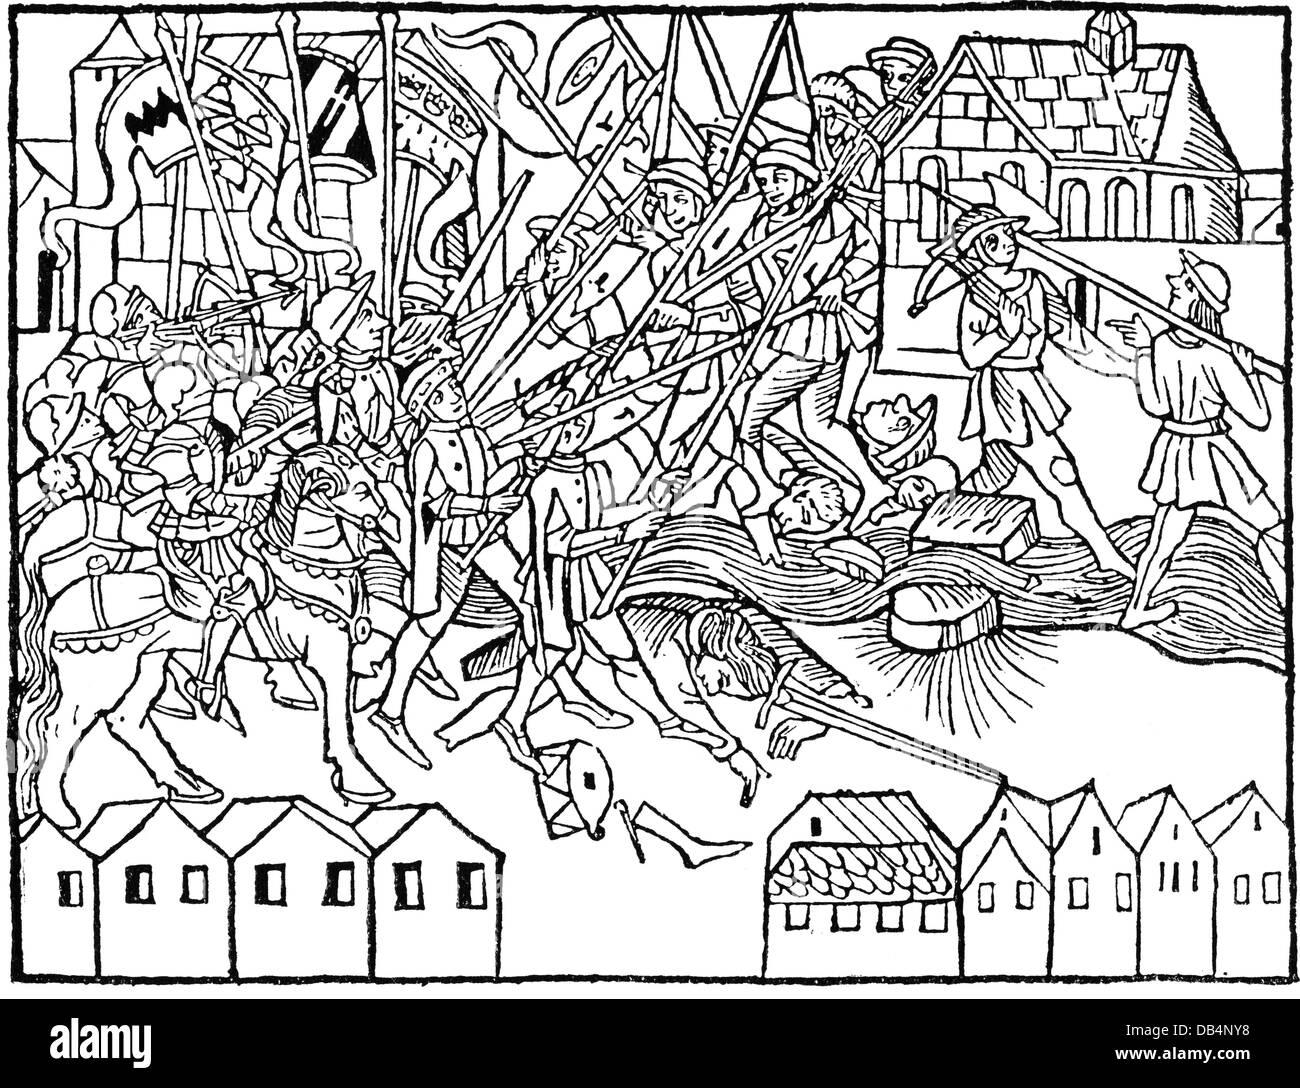 Weavers Uprising in Cologne 1370 - 1371, weaver battle, 20.11.1371, woodcut, Cologne chronicle by Johann Koelhoff, 1499, Germany, Cologne, Middle Ages, riot, riots, combat, combats, fight, fights, knight, knights, citizen, citizens, patrician, patricians, flags, weaver flag, civil war, weaver, weavers, craftsman, craftsmen, craftsperson, craftspersons, craftspeople, tradesman, tradesmen, oly Roman Empire, 14th century, historic, historical, medieval, people, Additional-Rights-Clearences-Not Available Stock Photo